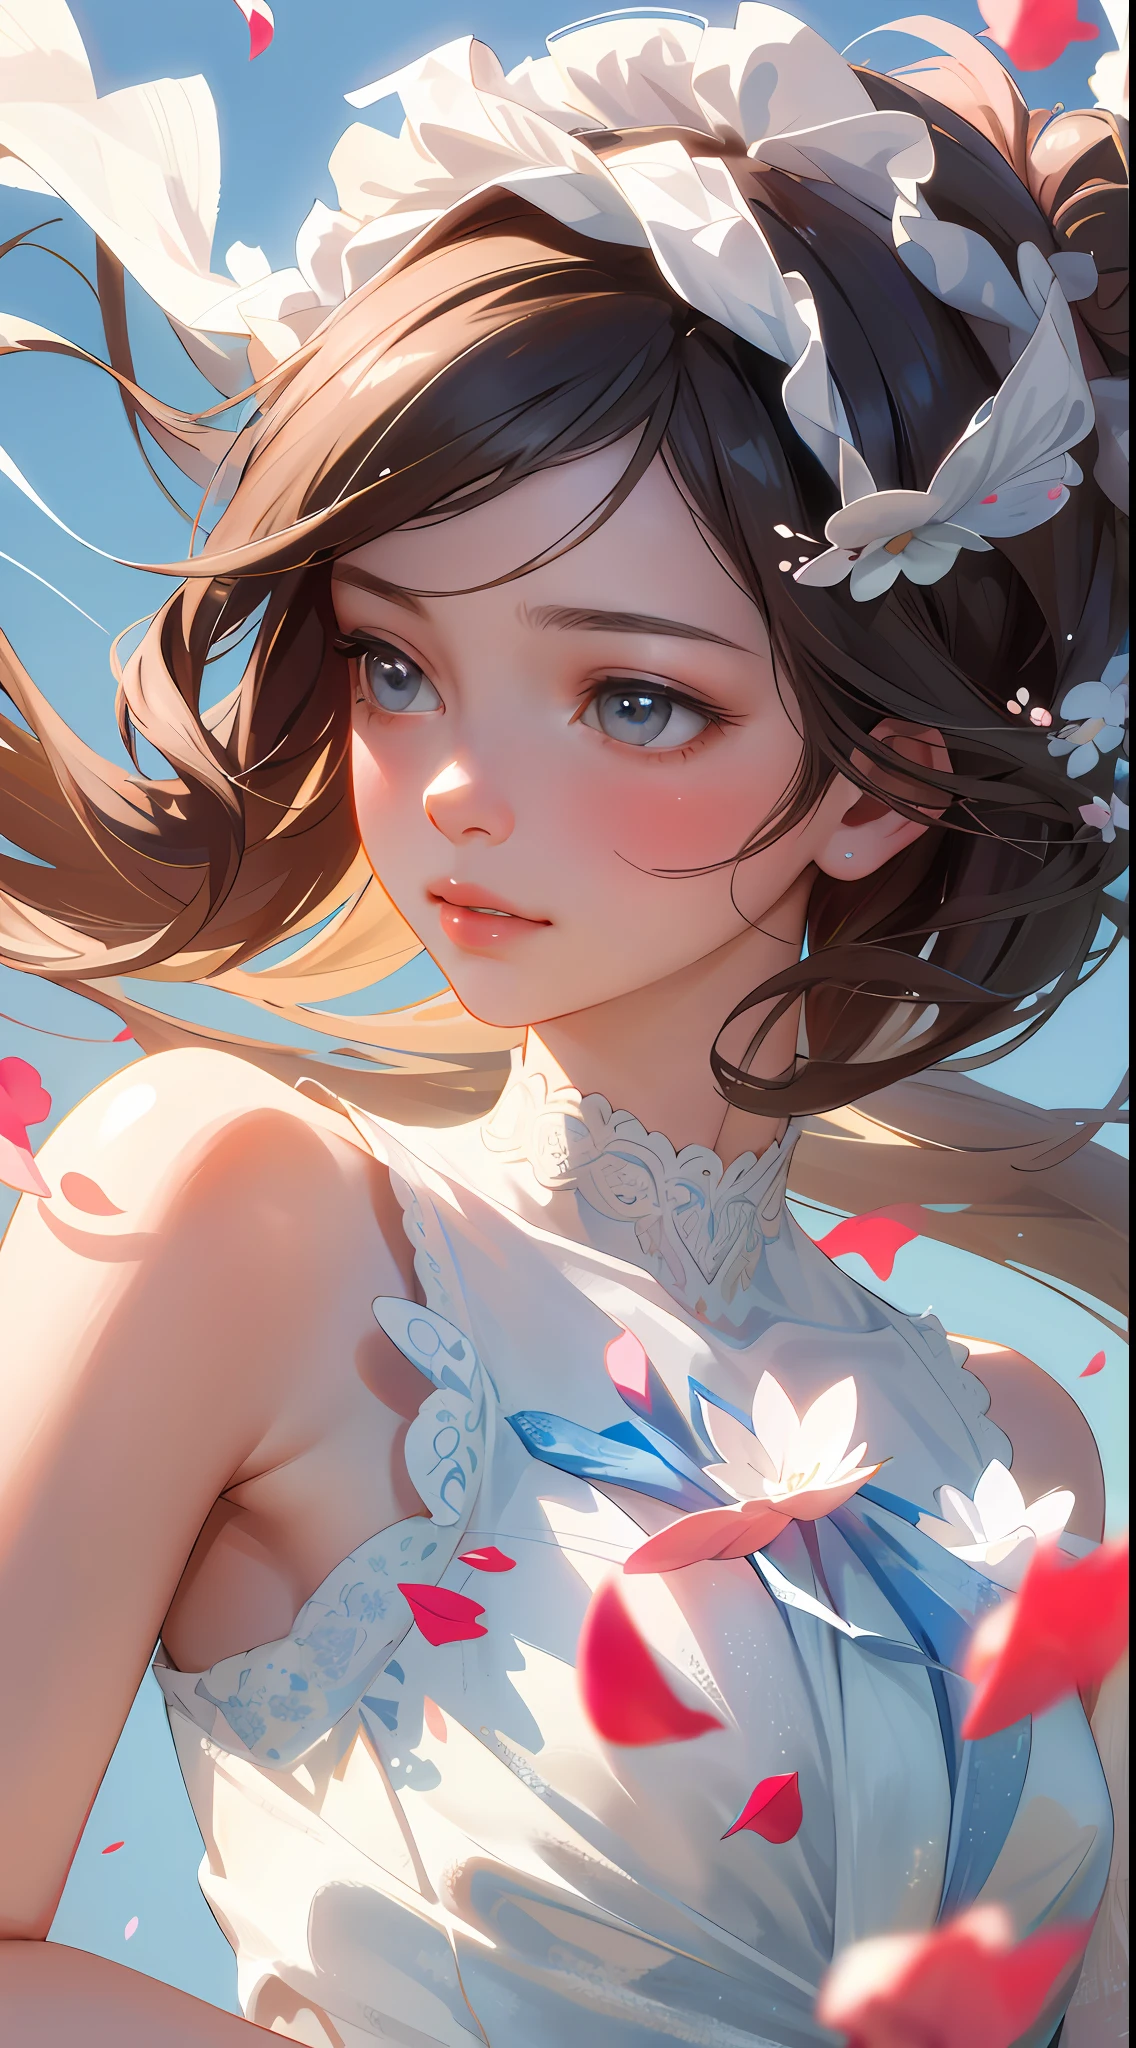 (best quality, masterpiece, ultra-realistic), 1 beautiful and delicate portrait of a girl, playful and cute, with floating petals in the background